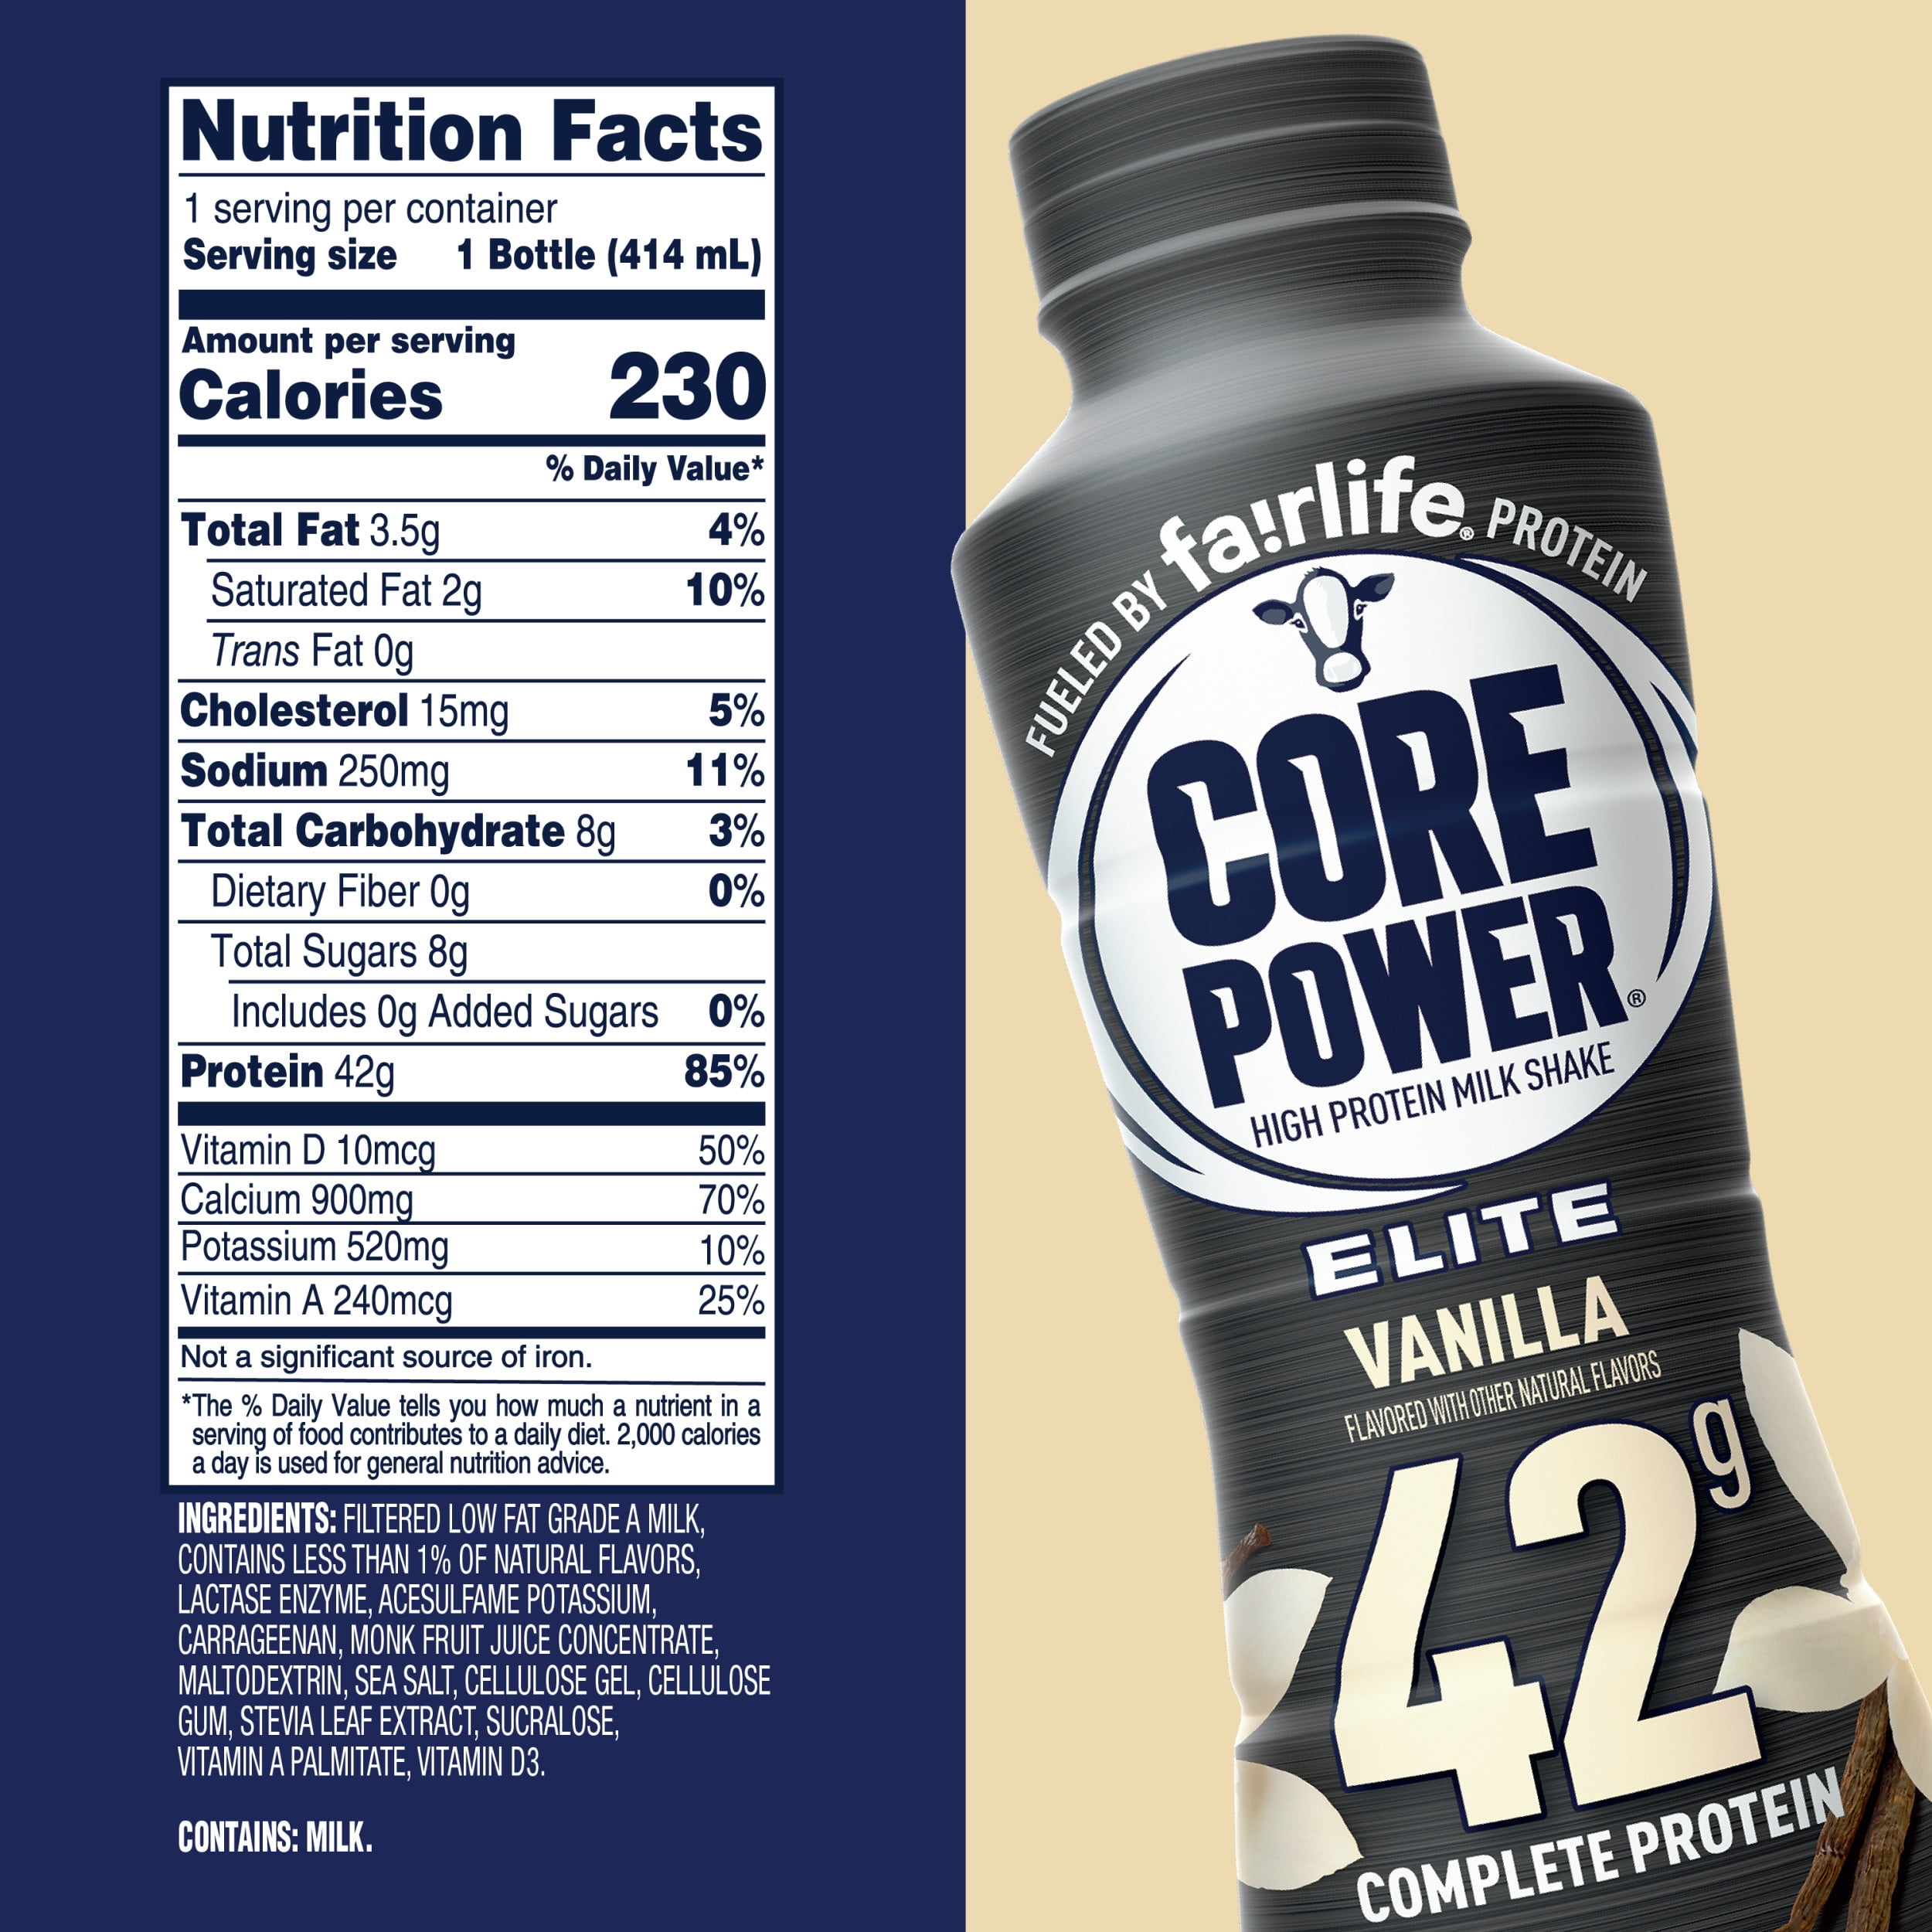  Core Power Fairlife Elite 42g High Protein Milk Shakes For  kosher diet, Ready to Drink for Workout Recovery, Chocolate, 14 Fl Oz (Pack  of 12), Liquid, Bottle : Grocery & Gourmet Food